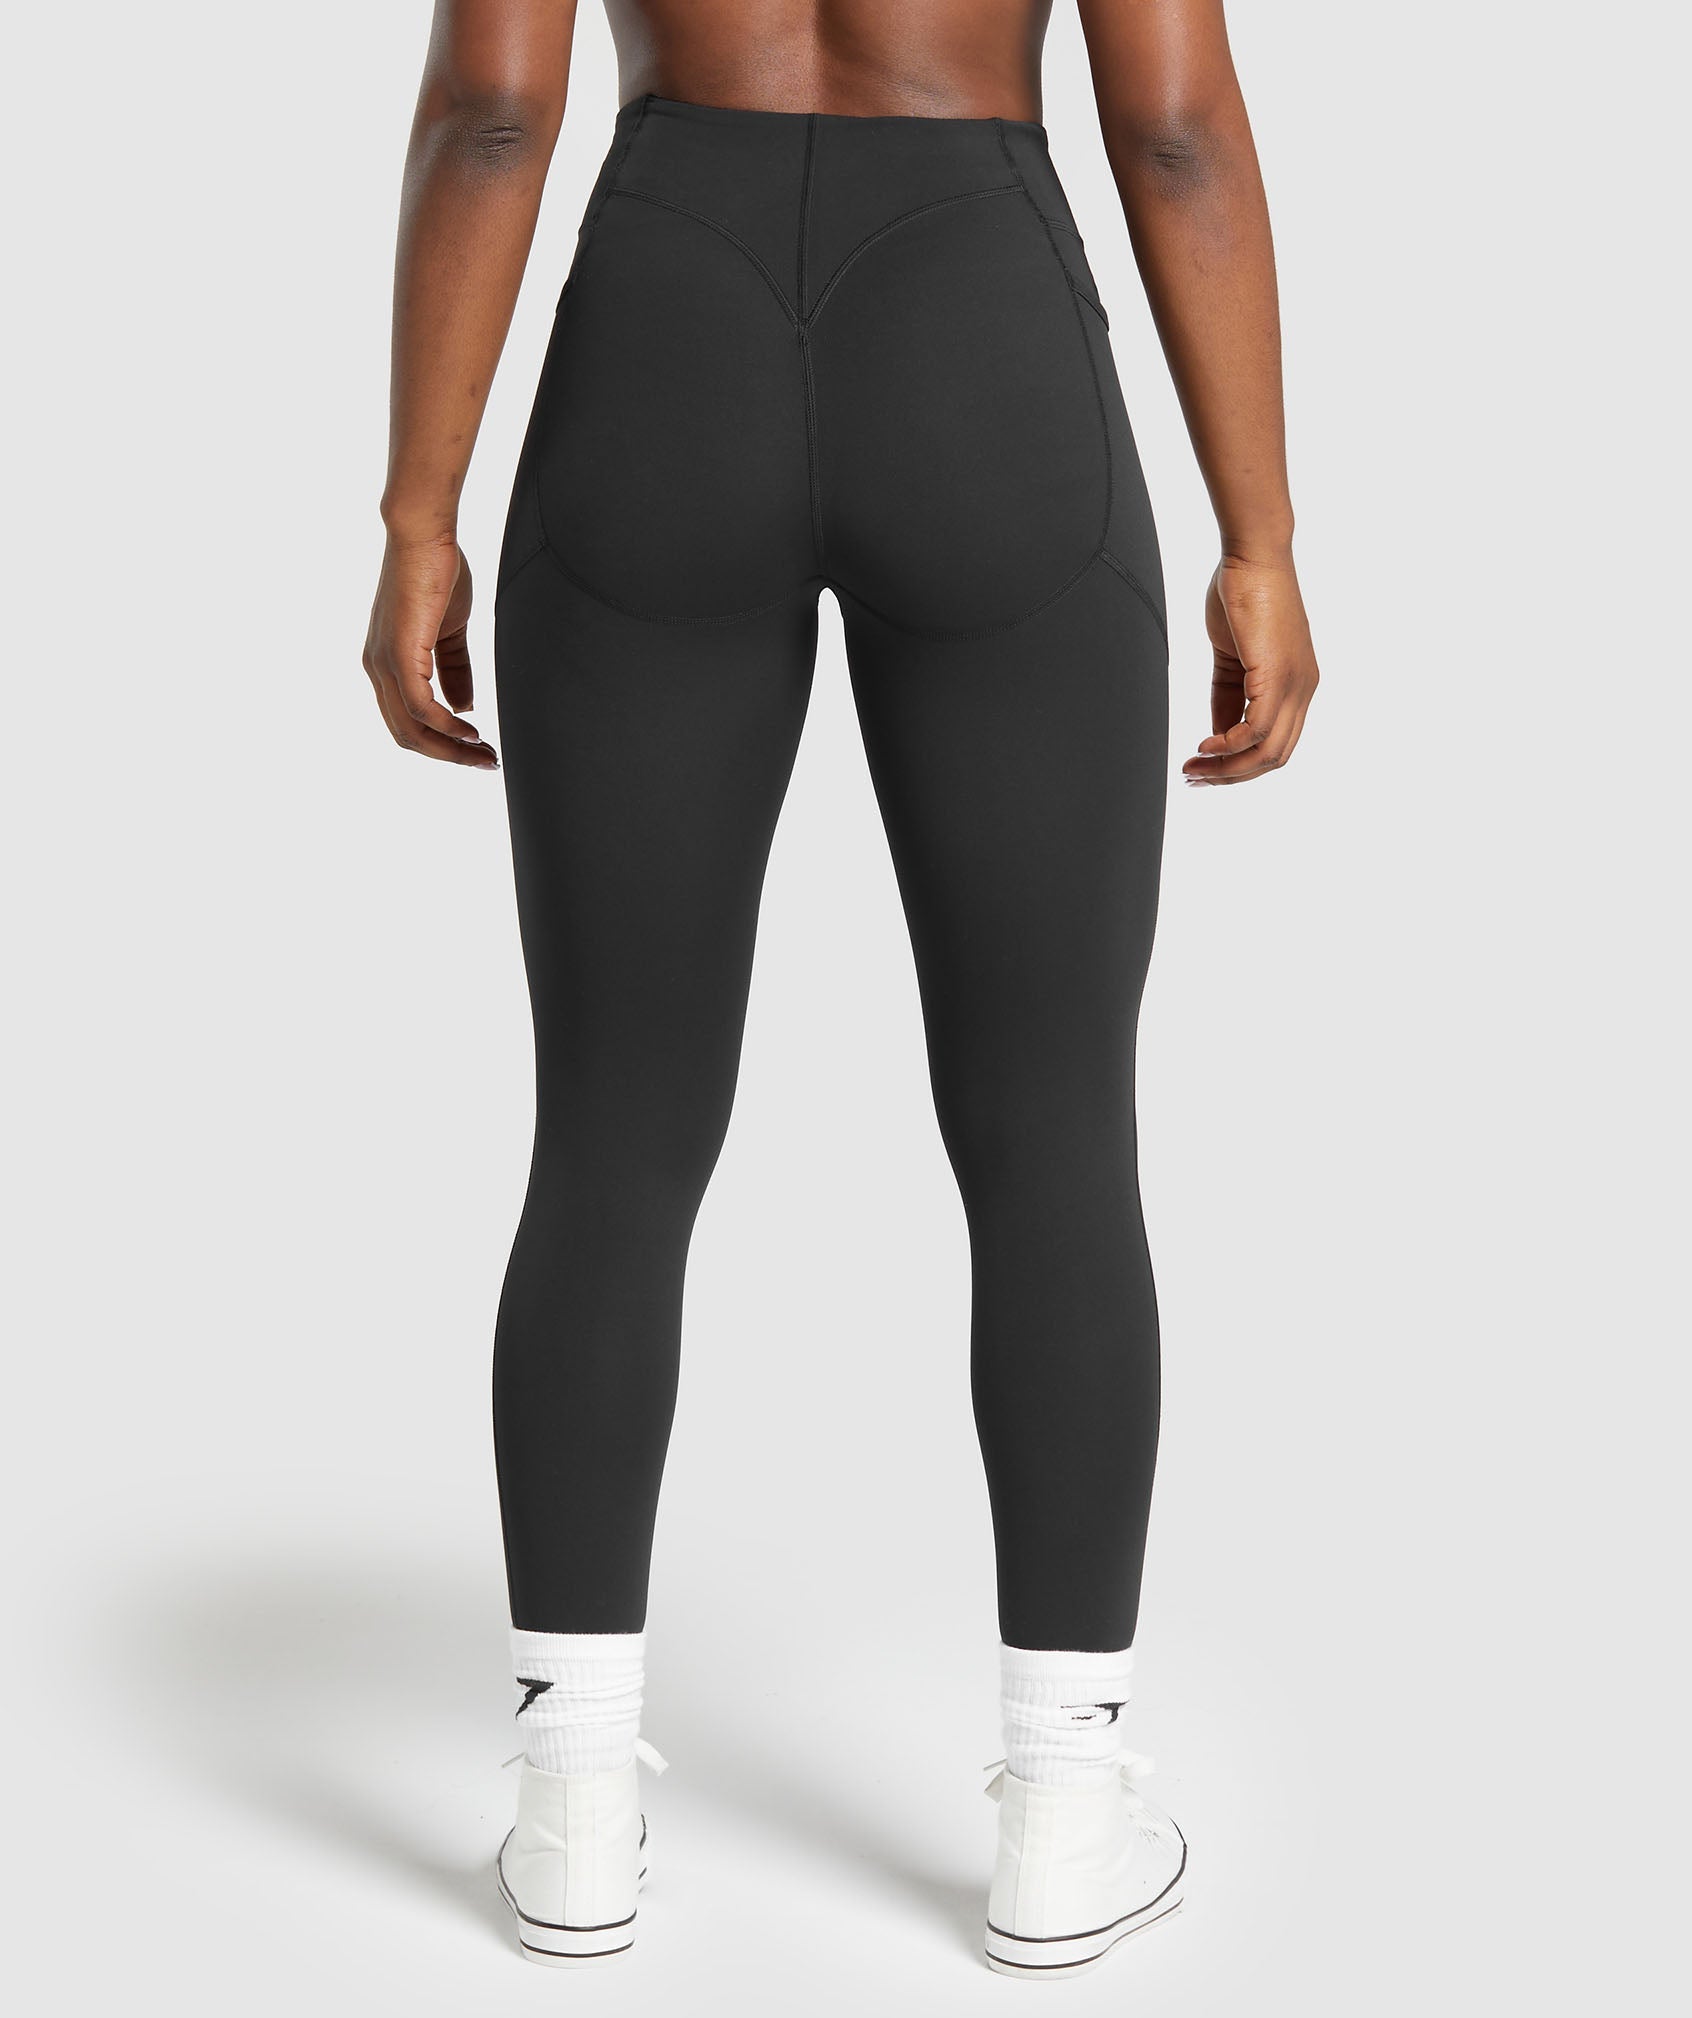 Unified High Waisted Leggings | Ash Grey